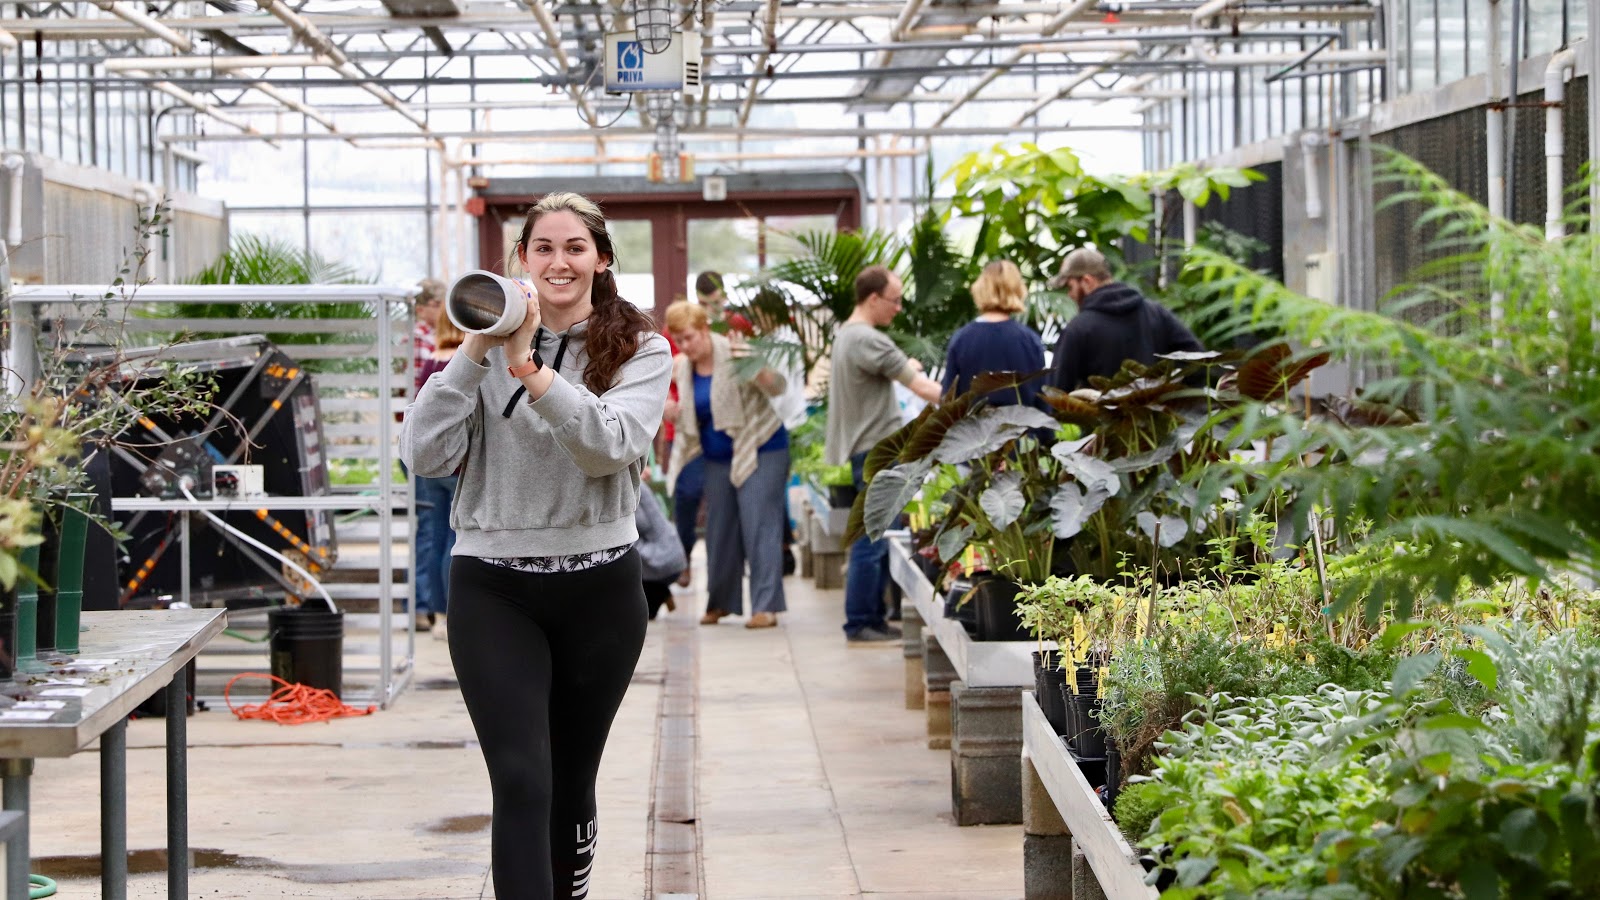 A student walking towards the camera while holding piping while walking through a greenhouse. There are plants to her left and some students and professors in the background.